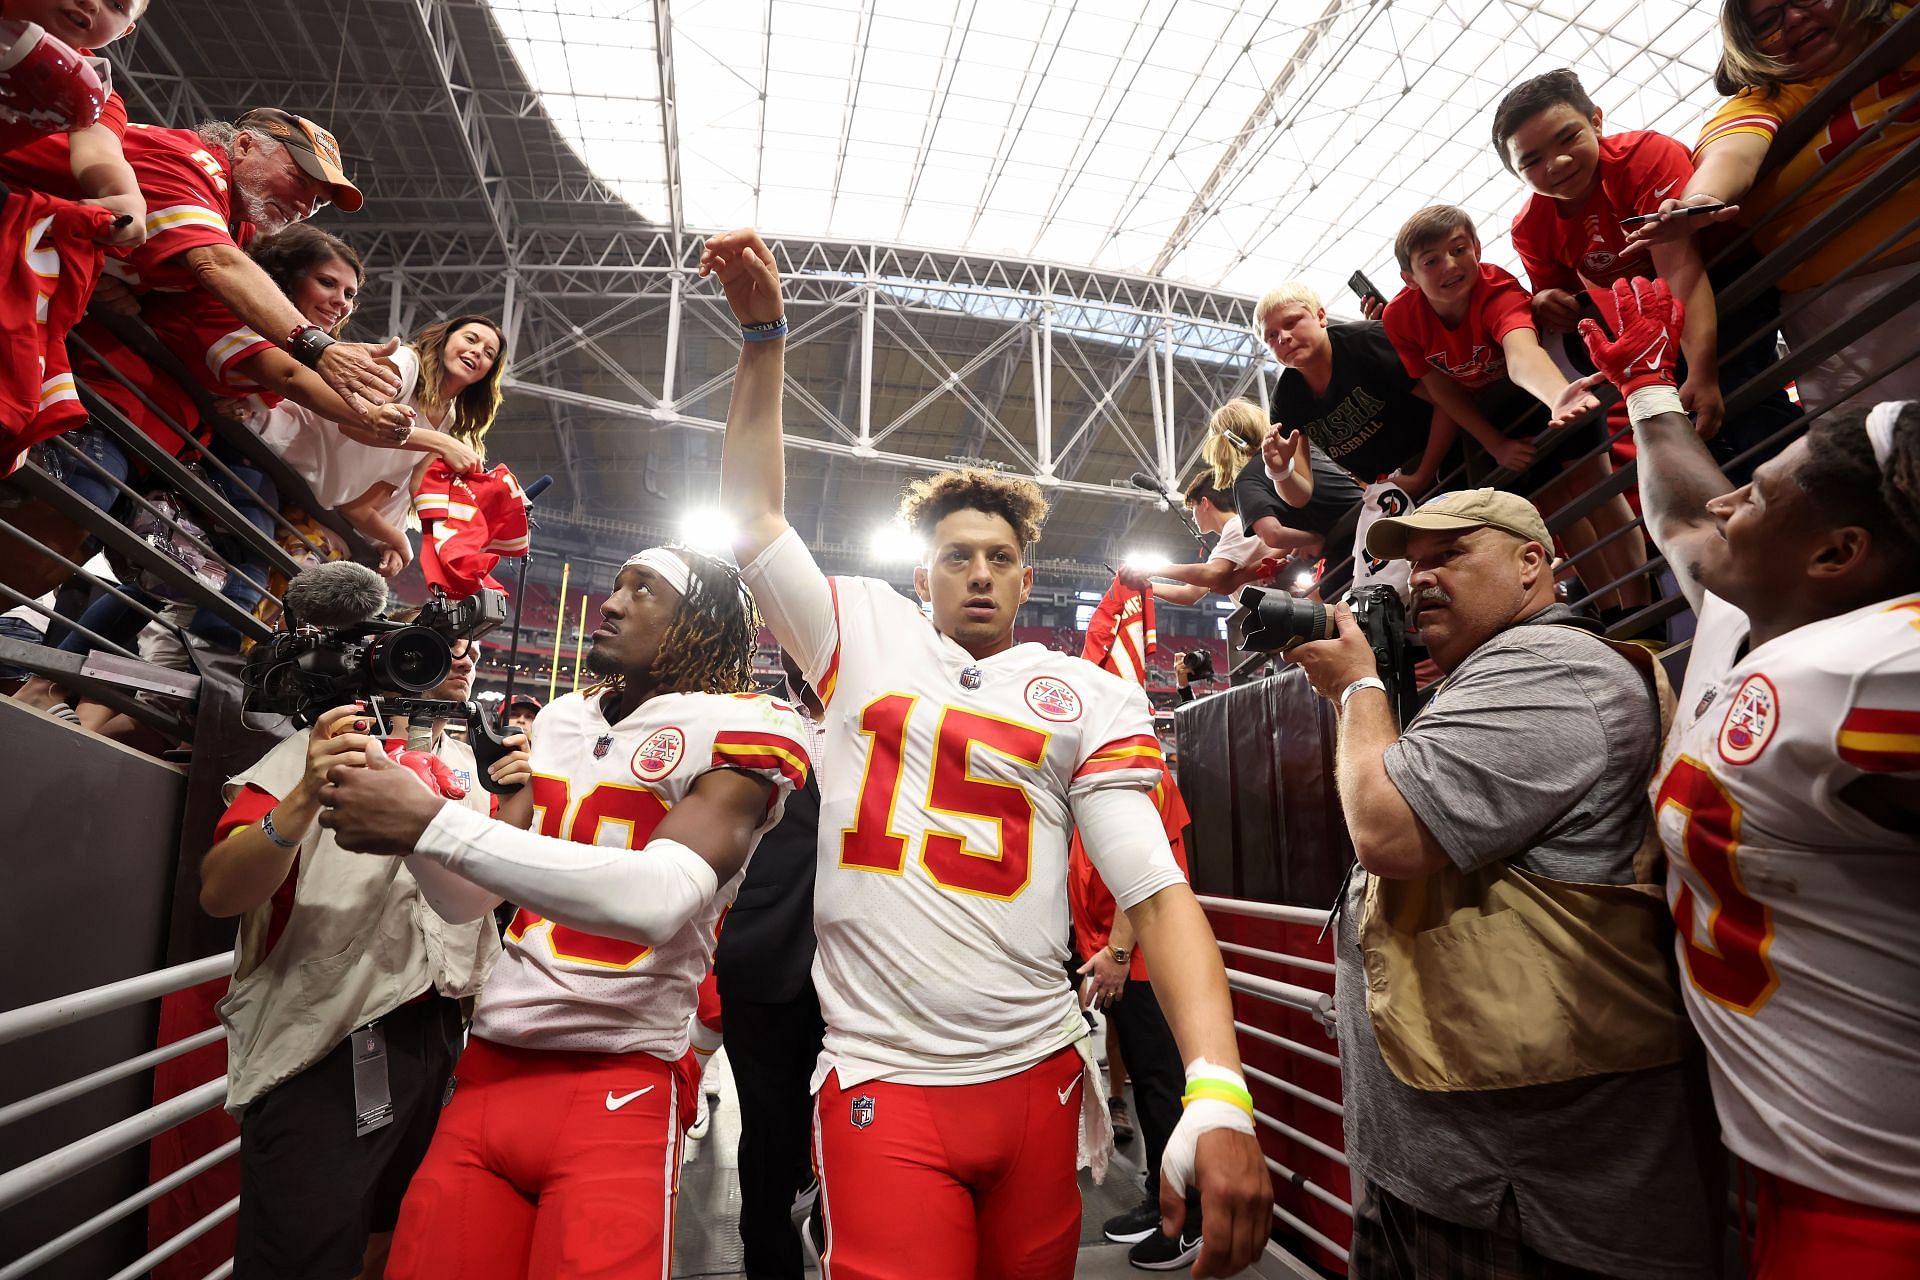 Patrick Mahomes #15 of the Kansas City Chiefs reacts after their game against the Arizona Cardinals